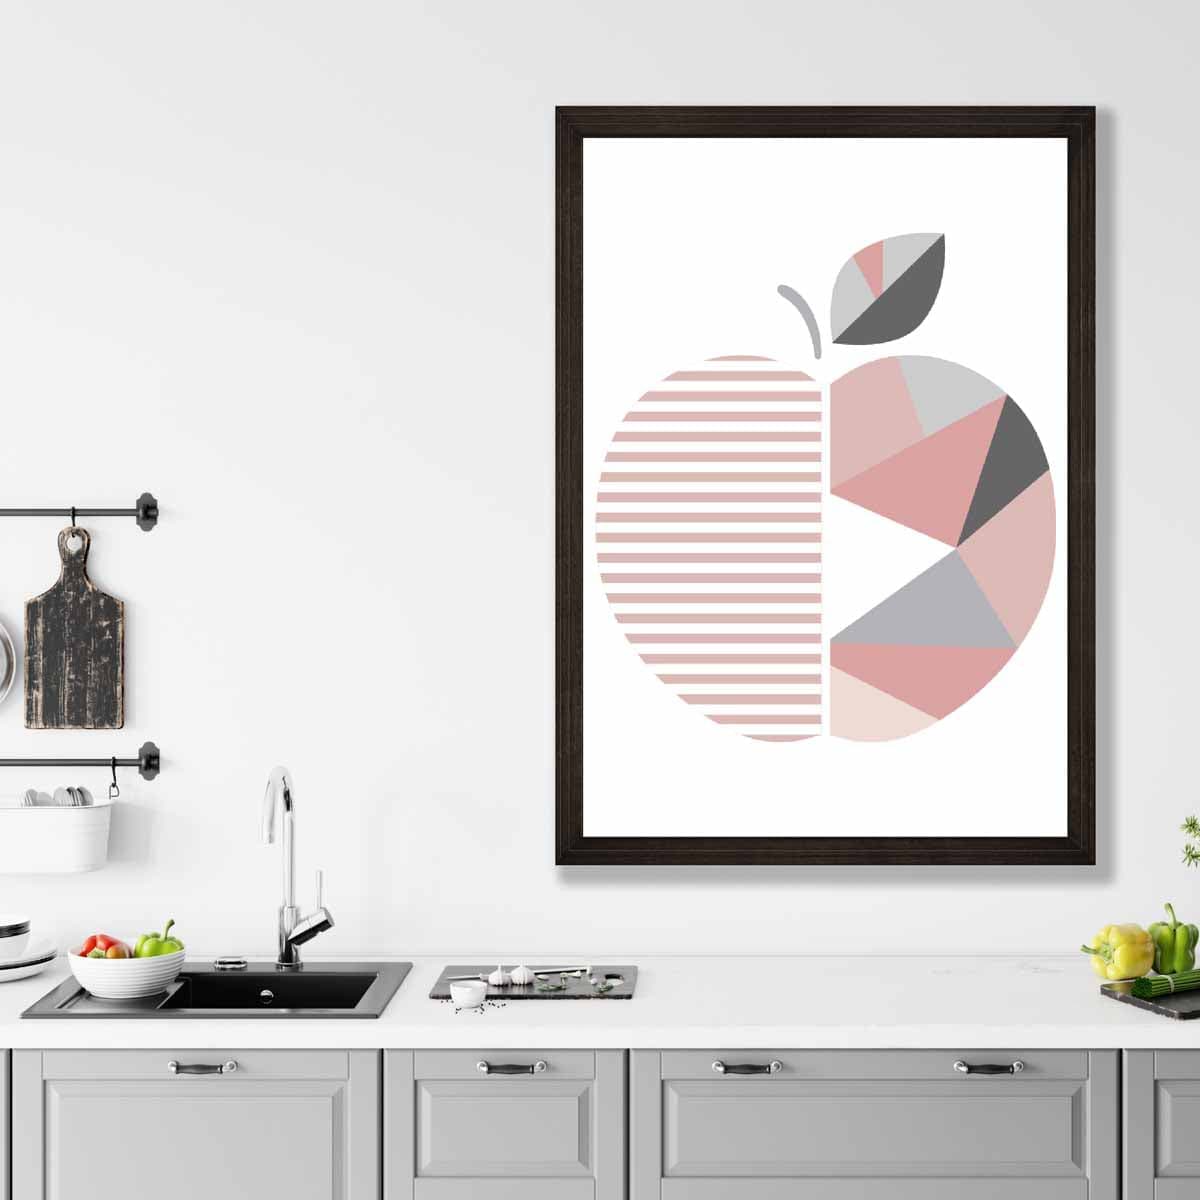 Geometric Fruit Poster of Apple in Blush Pink and Grey